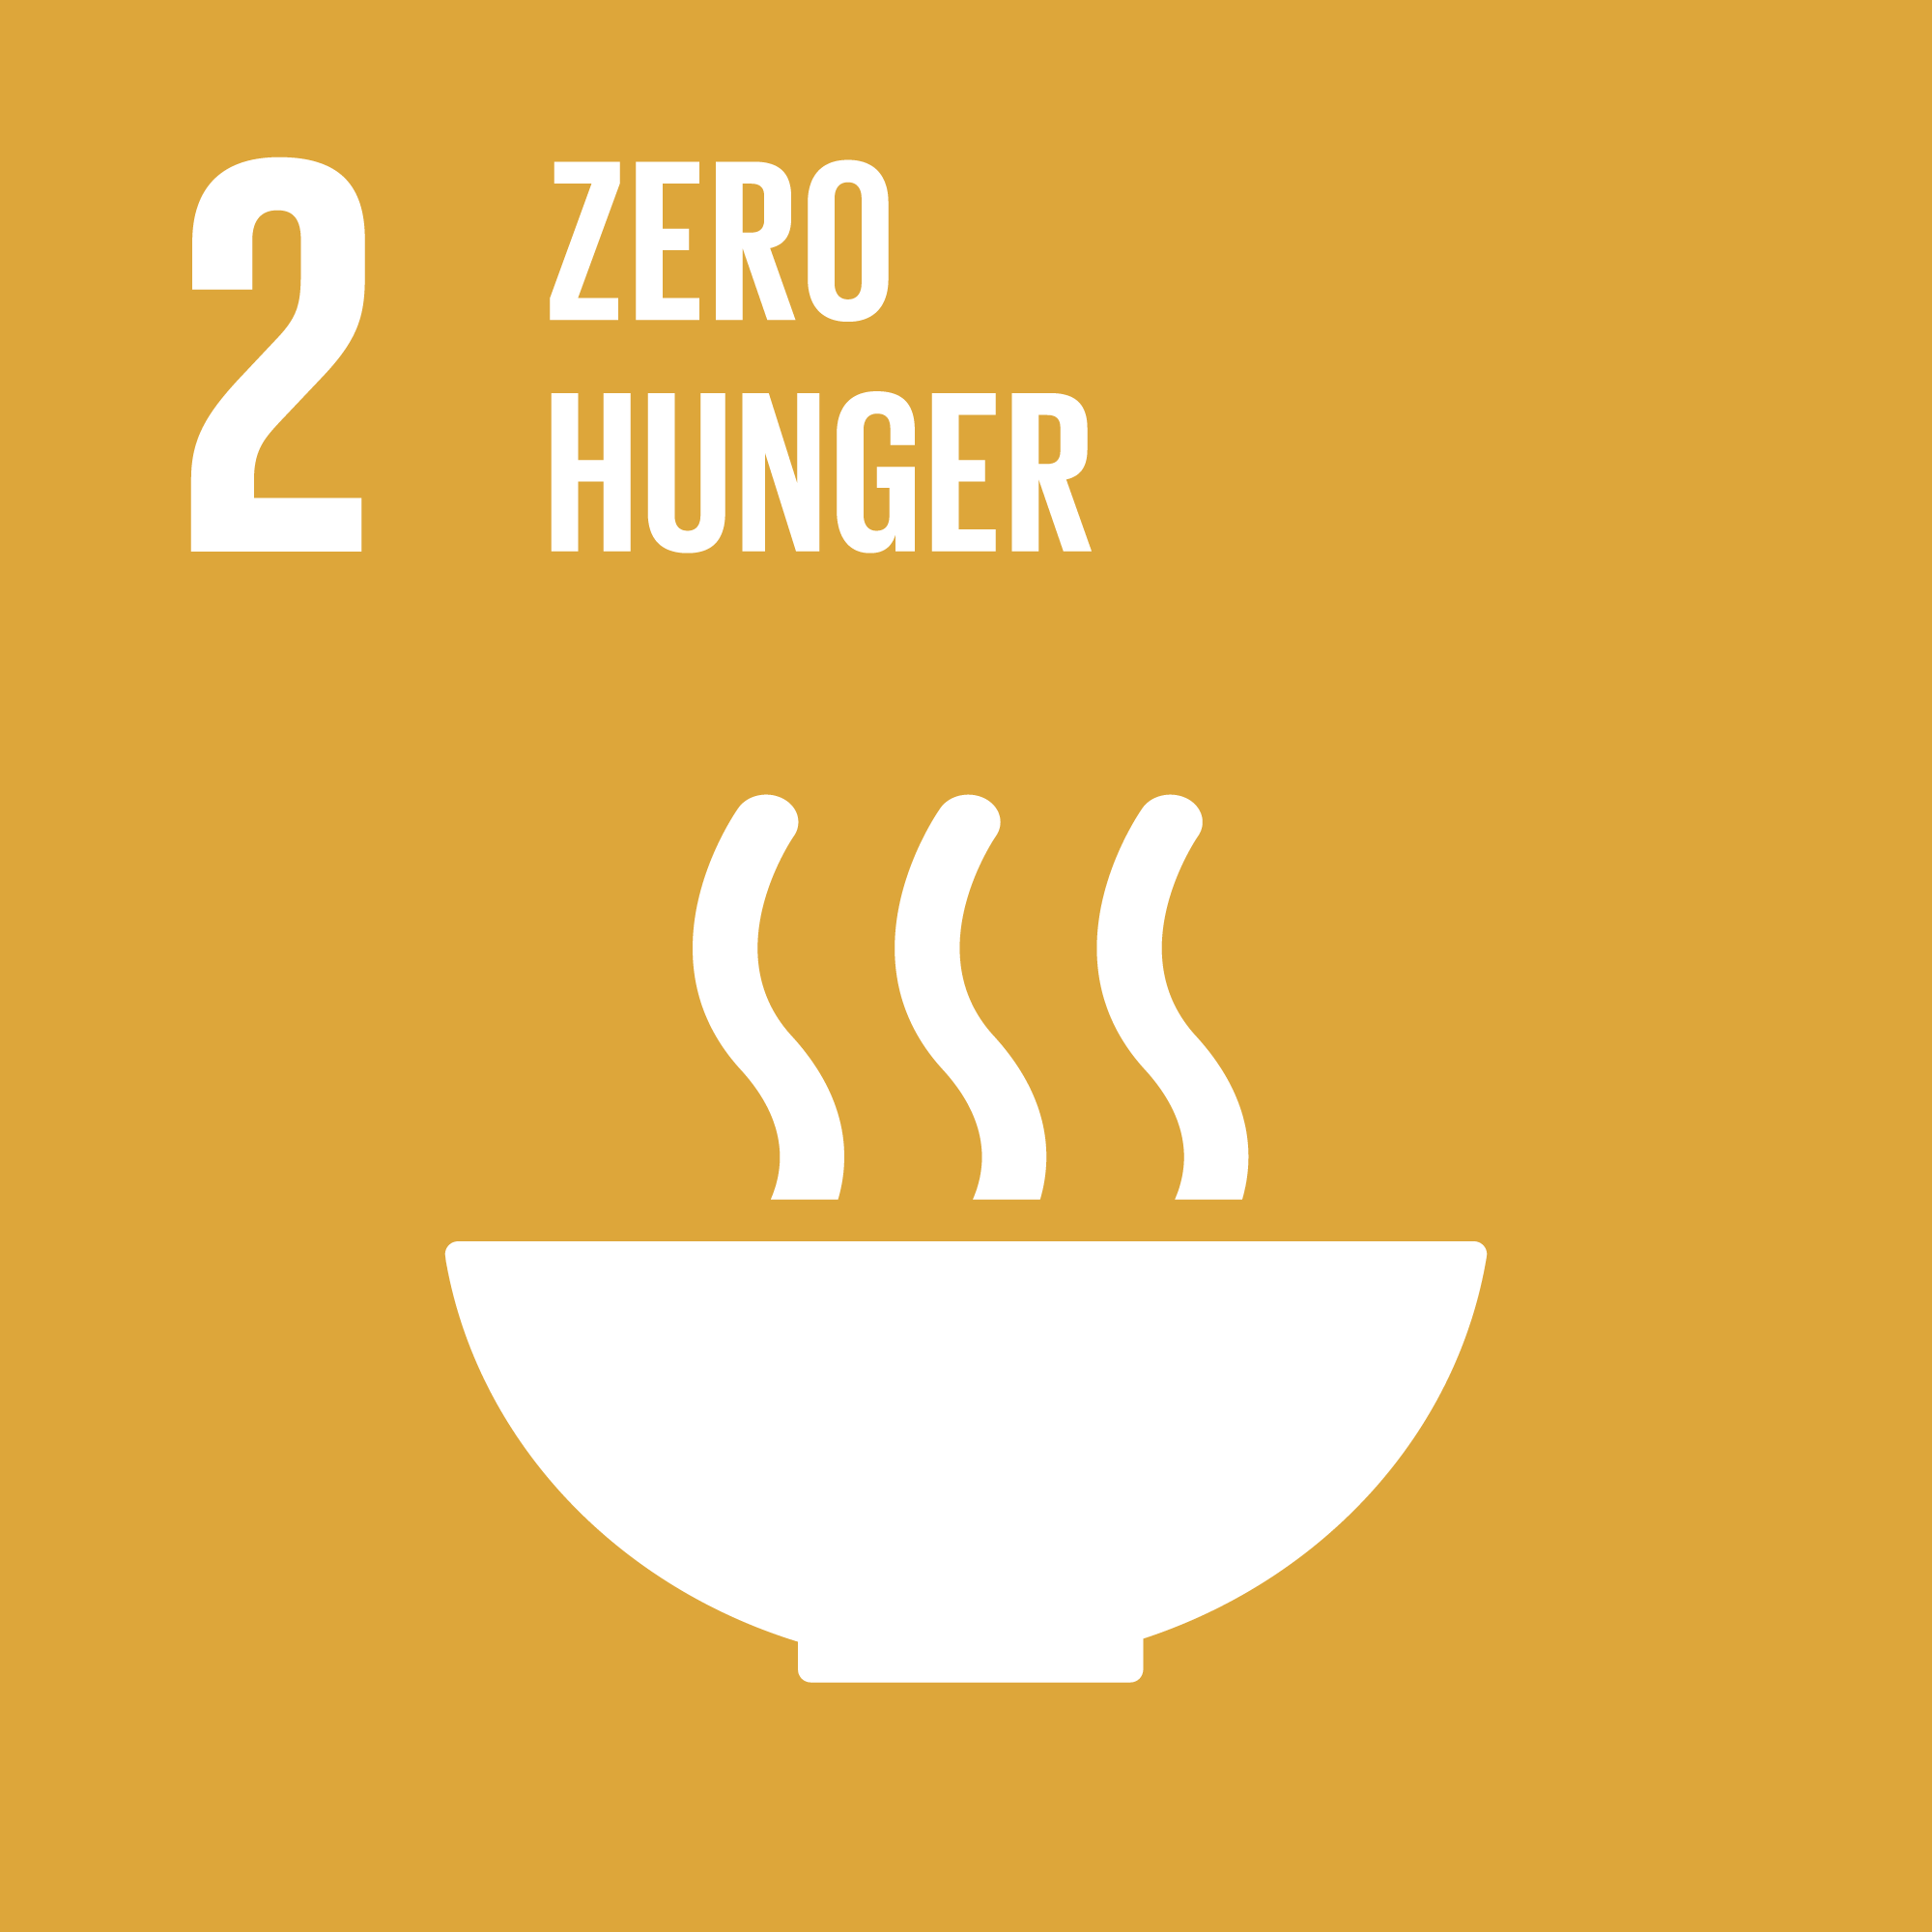 Goal 2: Zero Hunger - End hunger, achieve food security and improved nutrition by 2030.